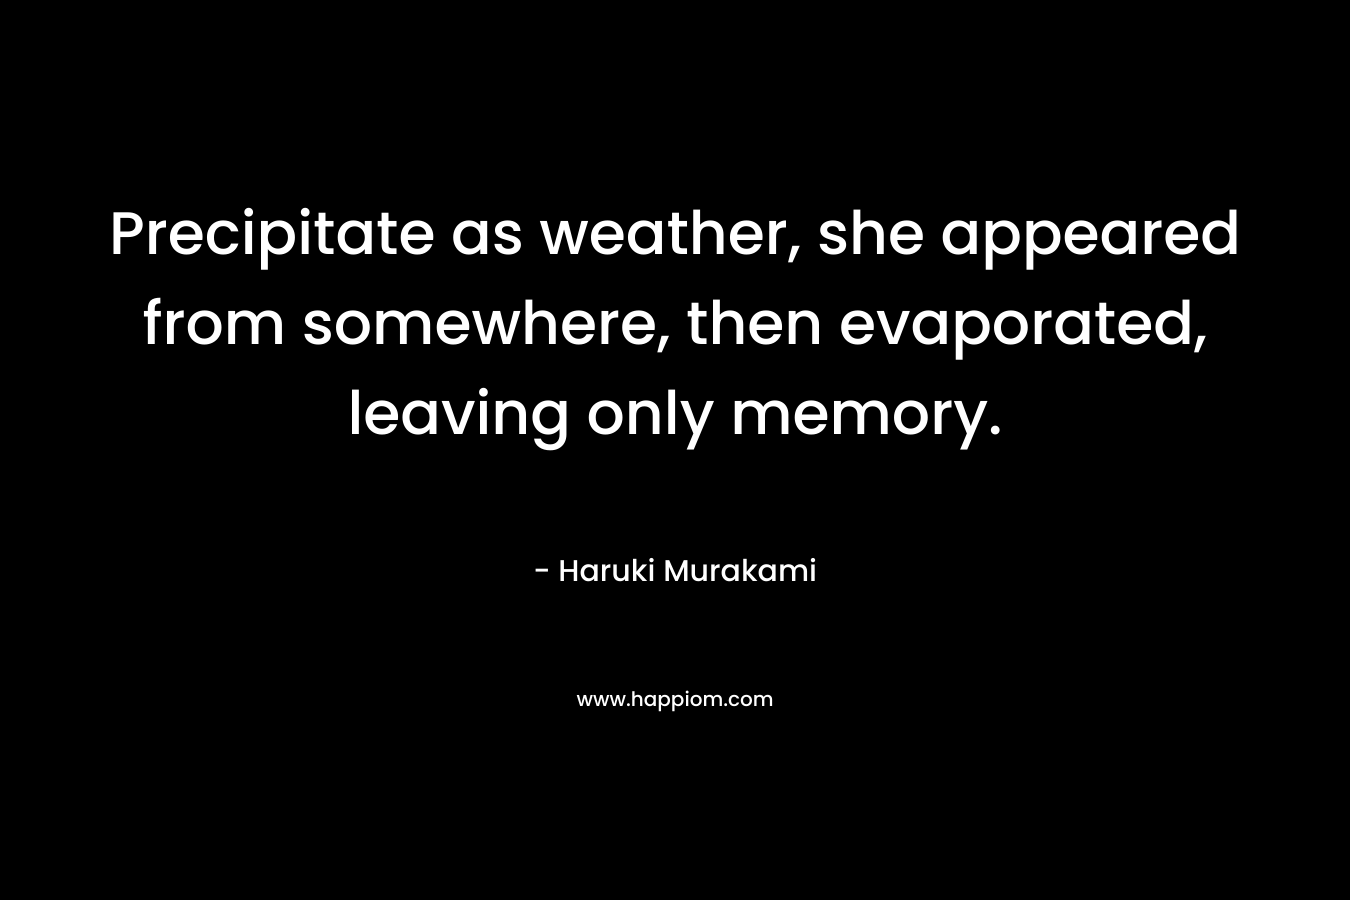 Precipitate as weather, she appeared from somewhere, then evaporated, leaving only memory.